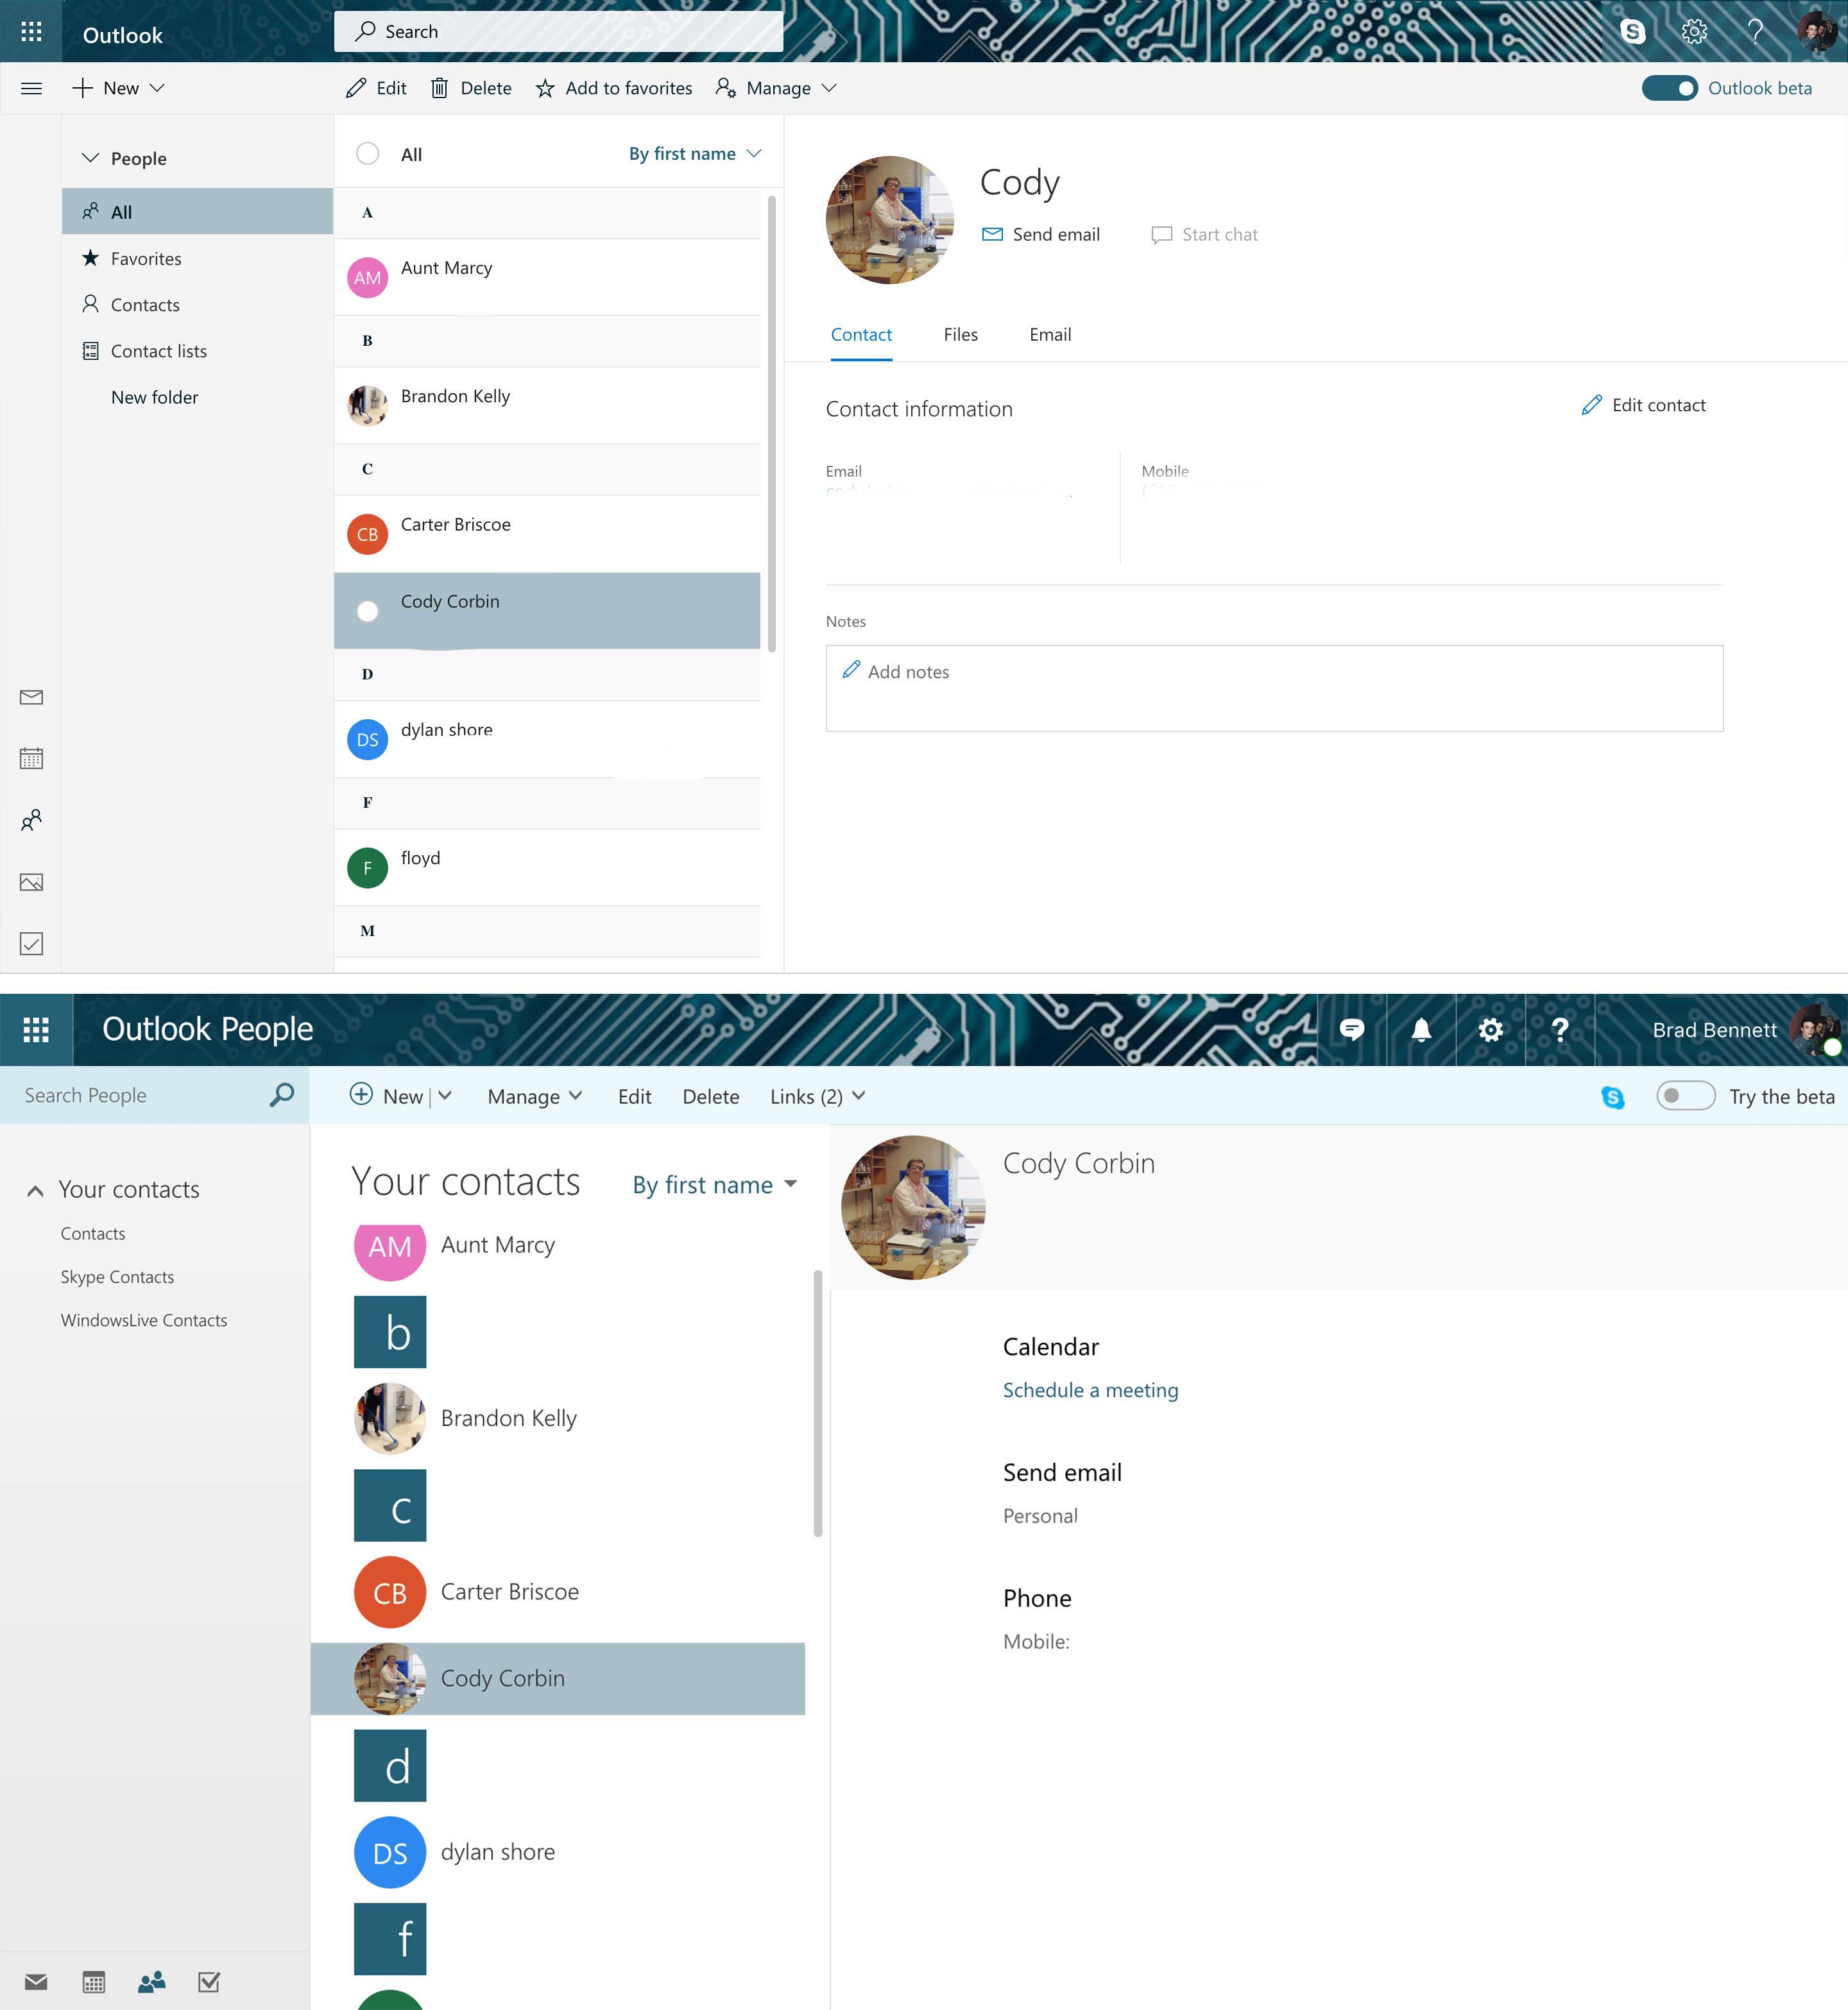 A comparison of the Outlook contacts page with the beta on the top and the old version on the bottom.